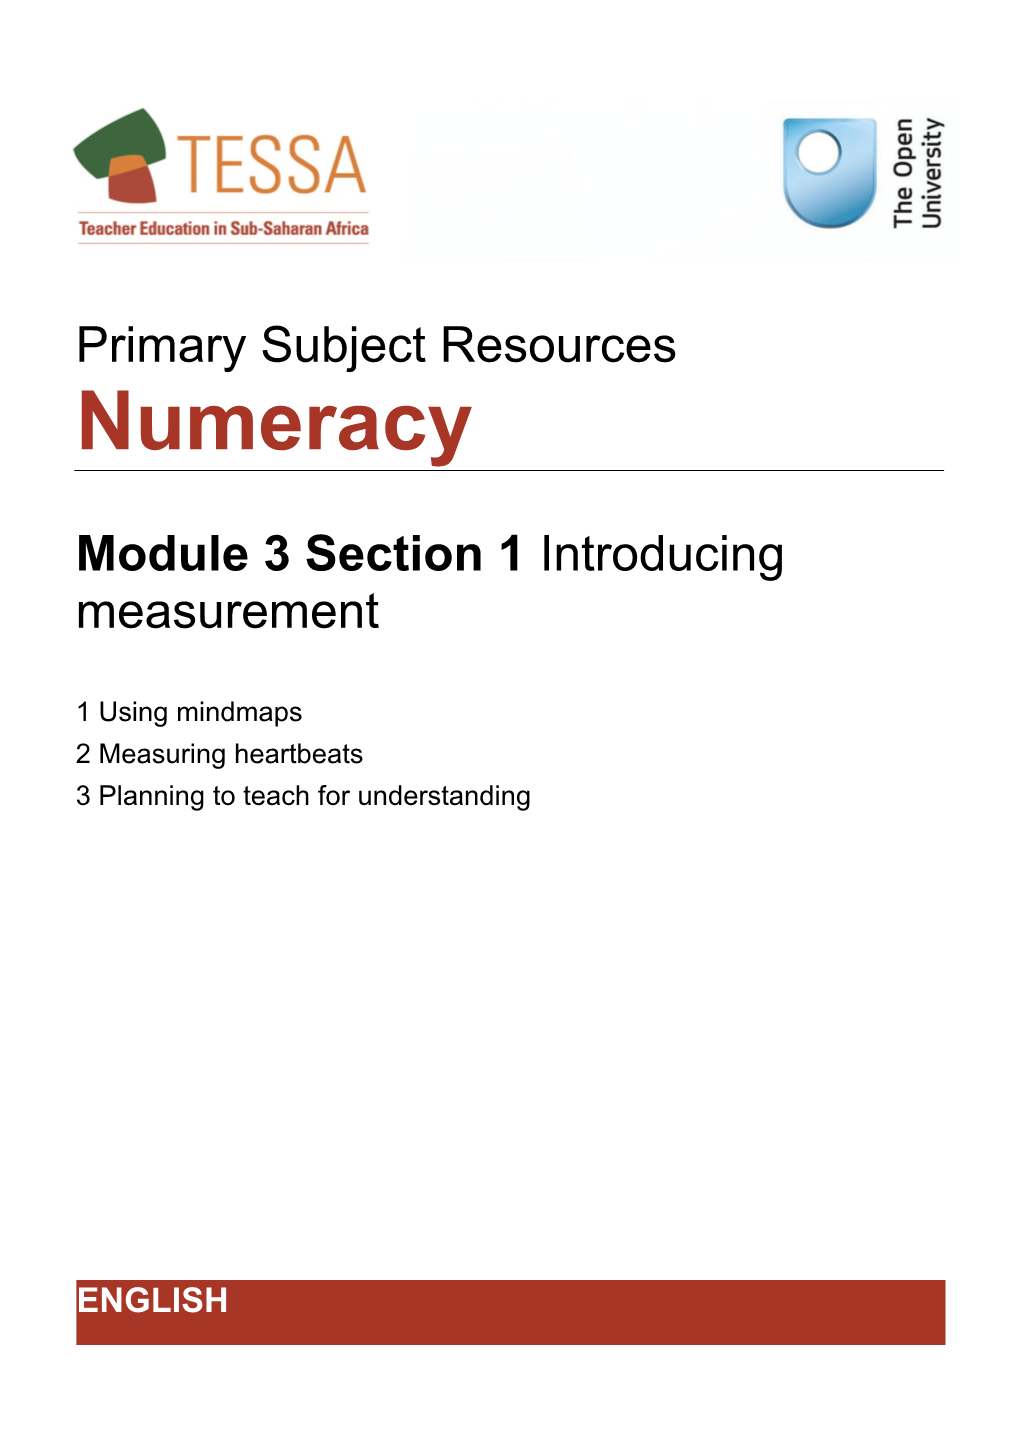 Section 1 : Introducing Measurement